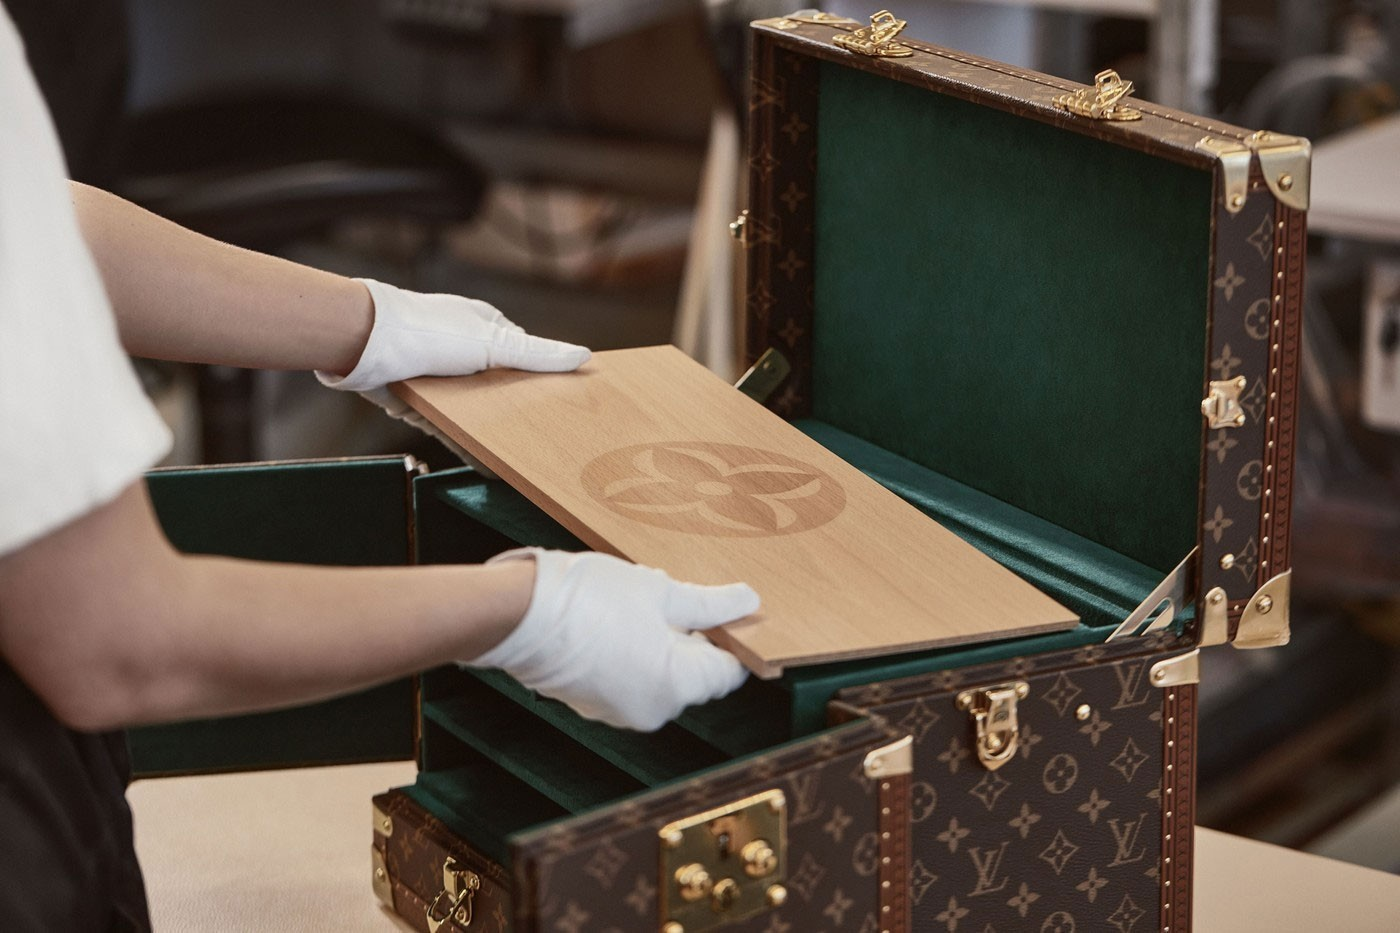 LOUIS VUITTON HAS A NEW MONOGRAMMED LUXE VANITY MAHJONG TRUNK WITH